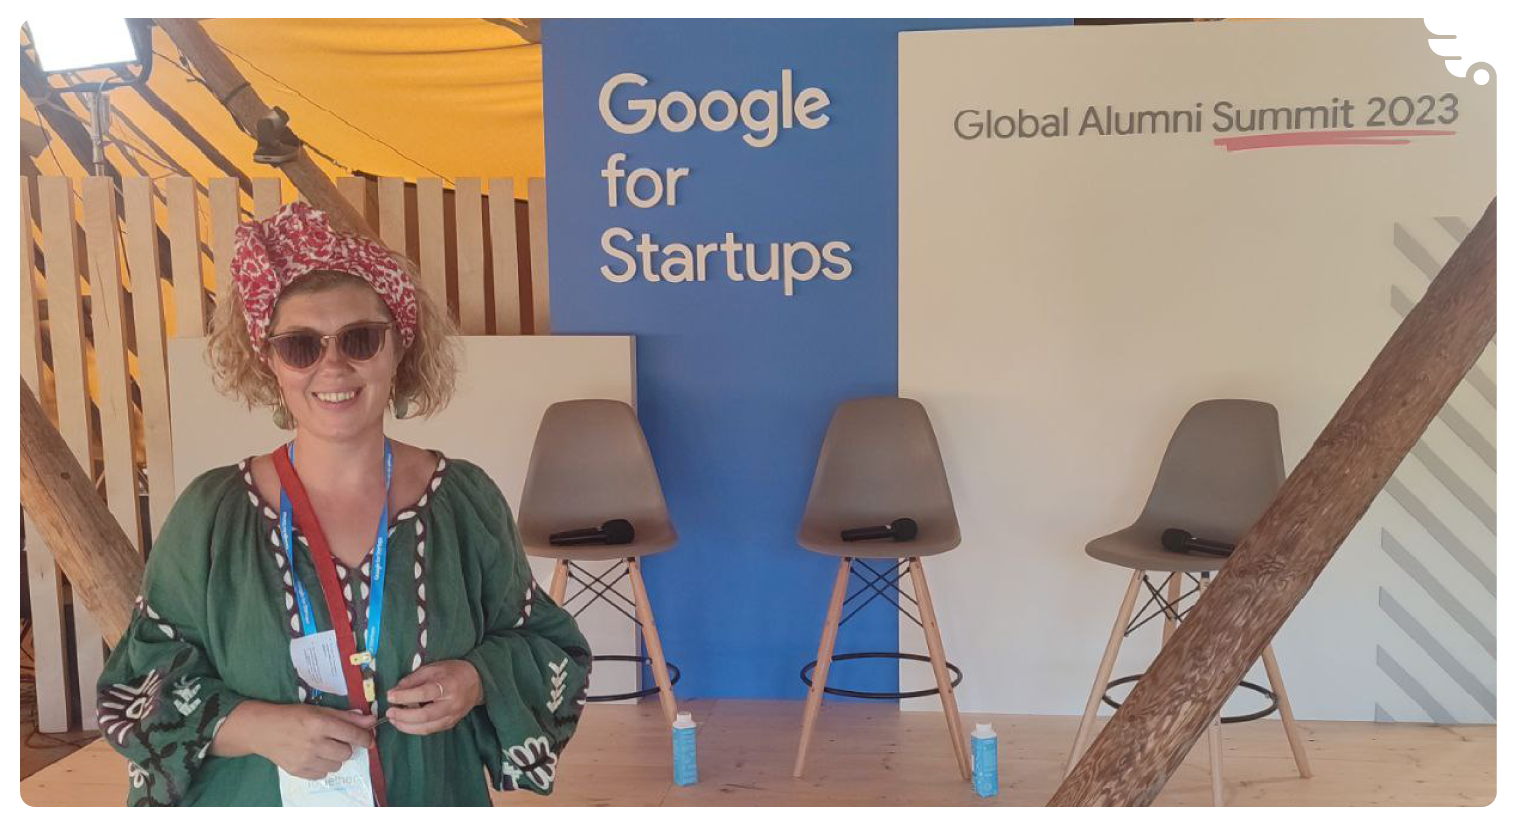 Charting Growth: Our Journey from Google for Startups to Global Alumni Summit